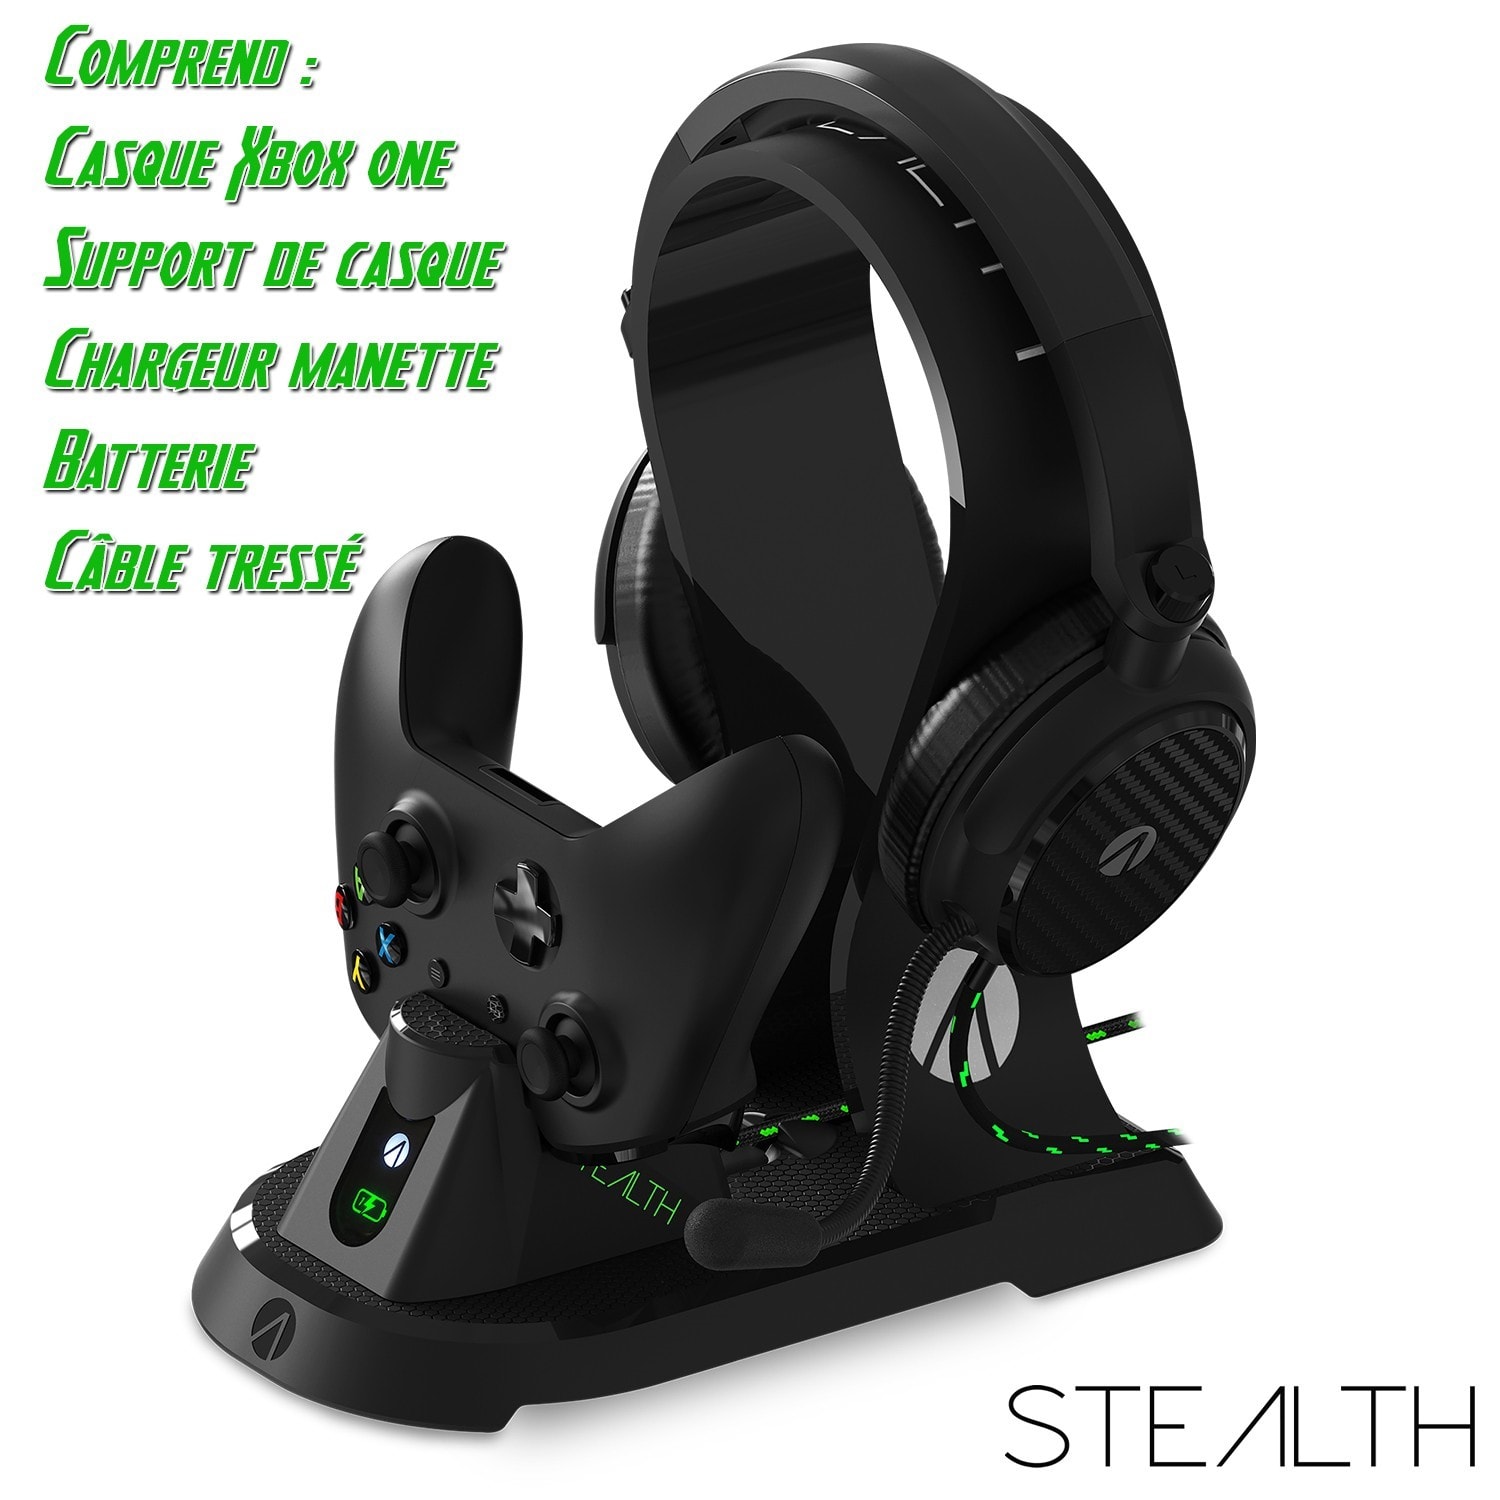 Station ultime gaming noire pour xbox one stealth sx-c160, chargeur +  batterie + casque + support STEALTH